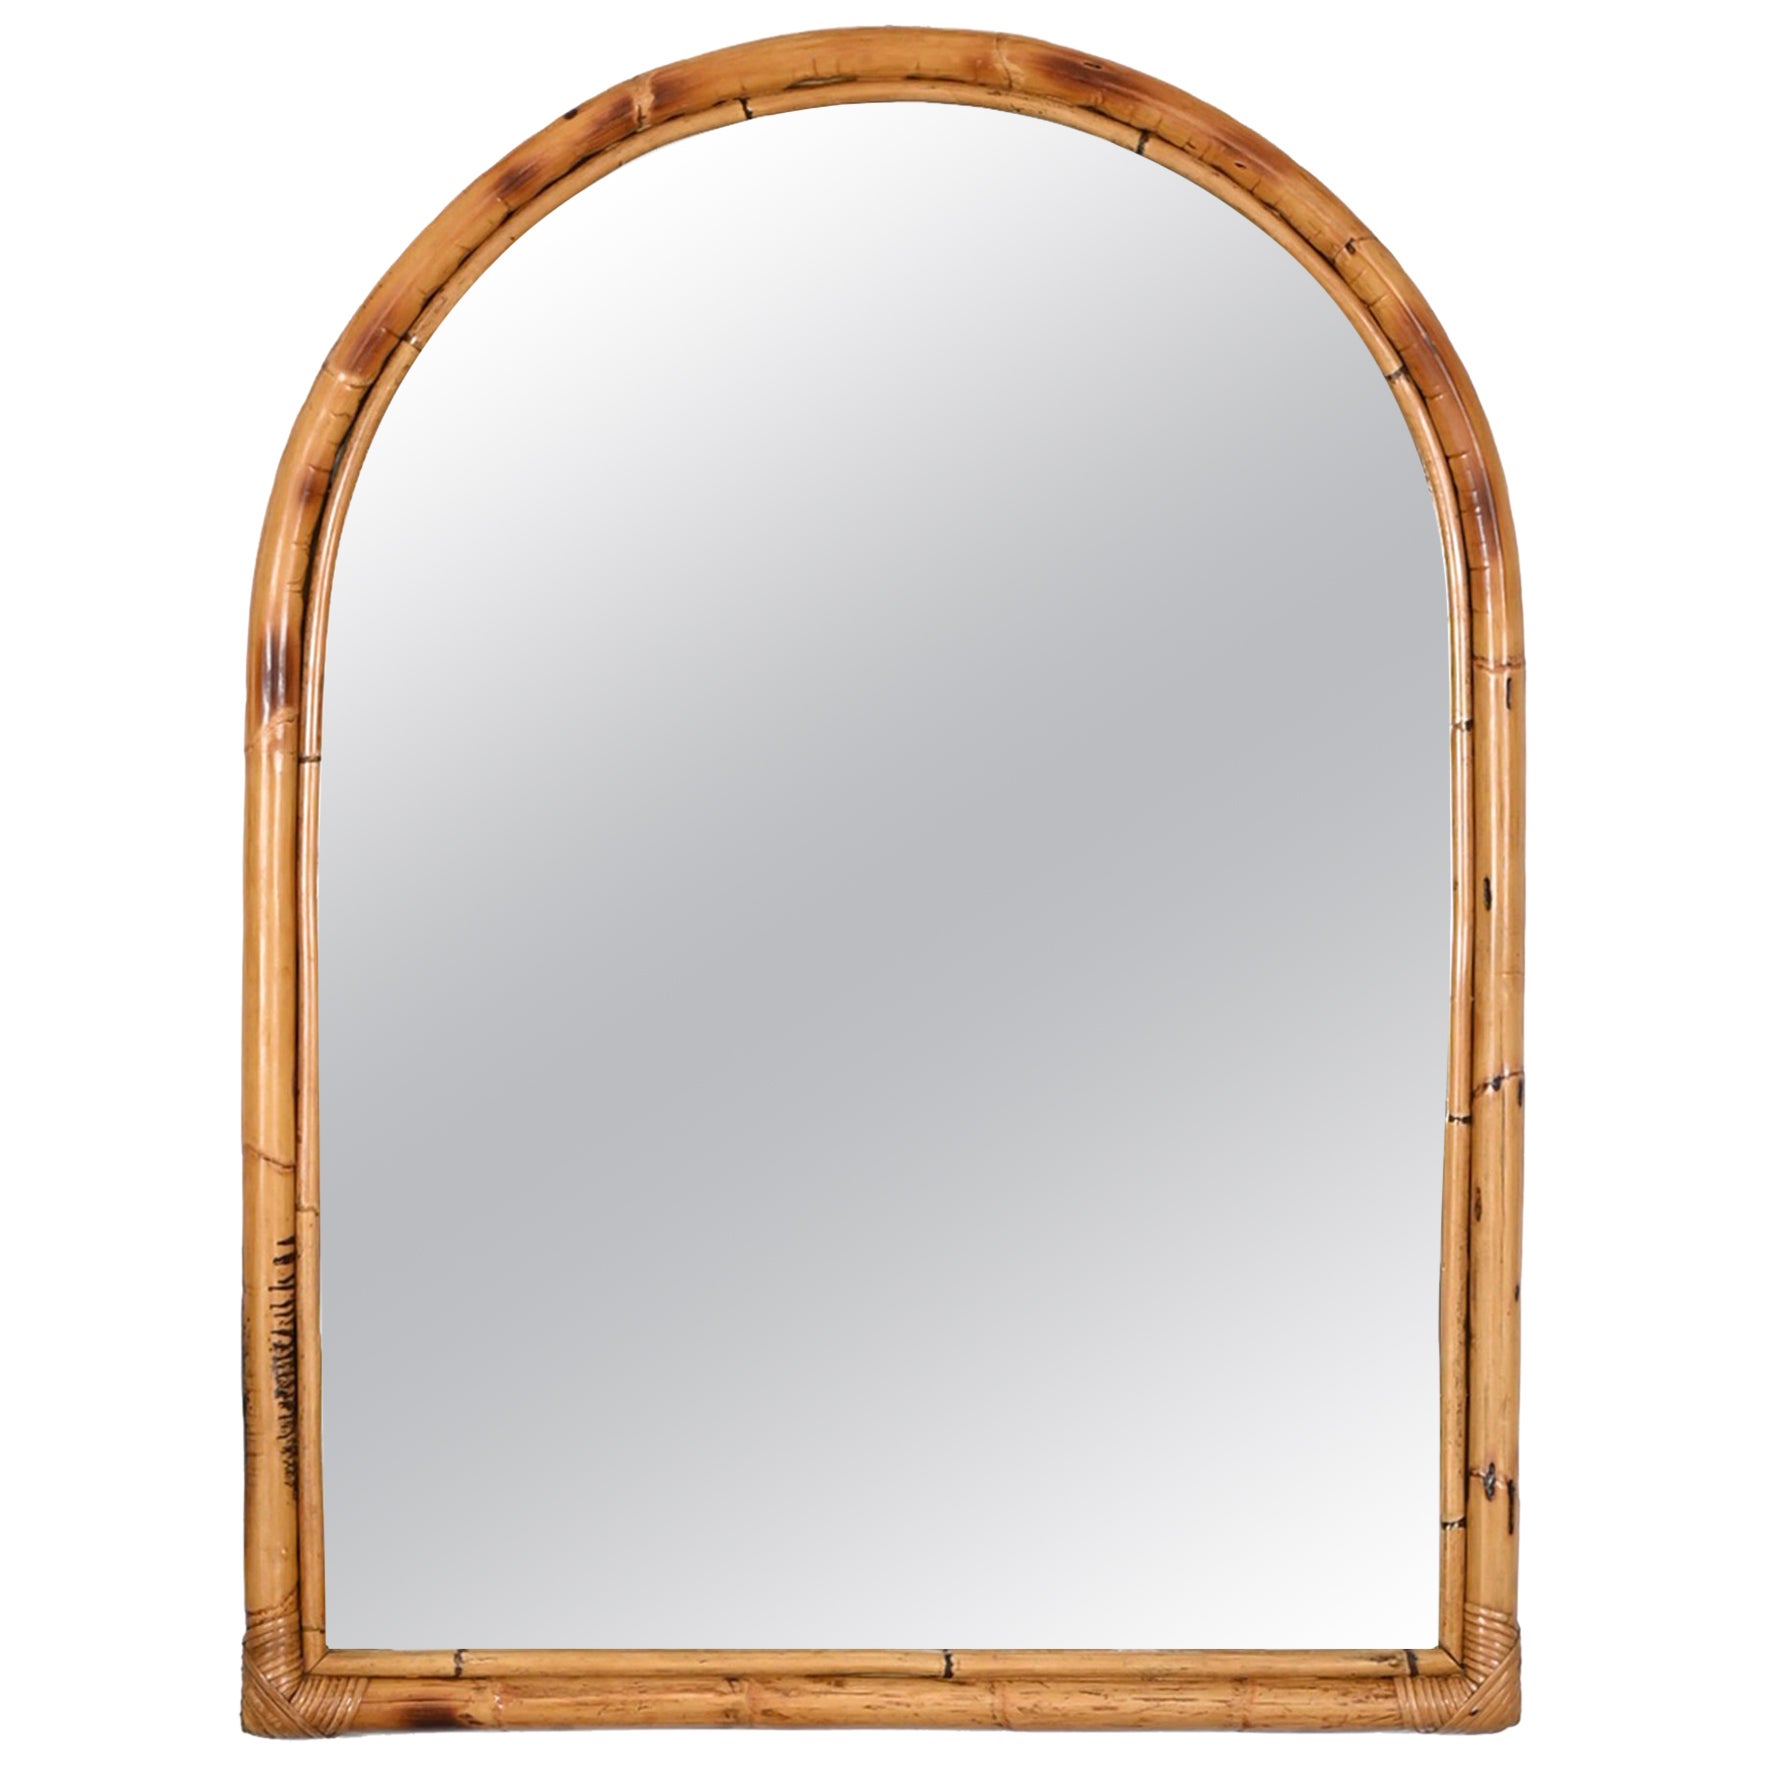 Midcentury Italian Arch Mirror with Double Bamboo and Rattan Frame, Italy, 1970s For Sale